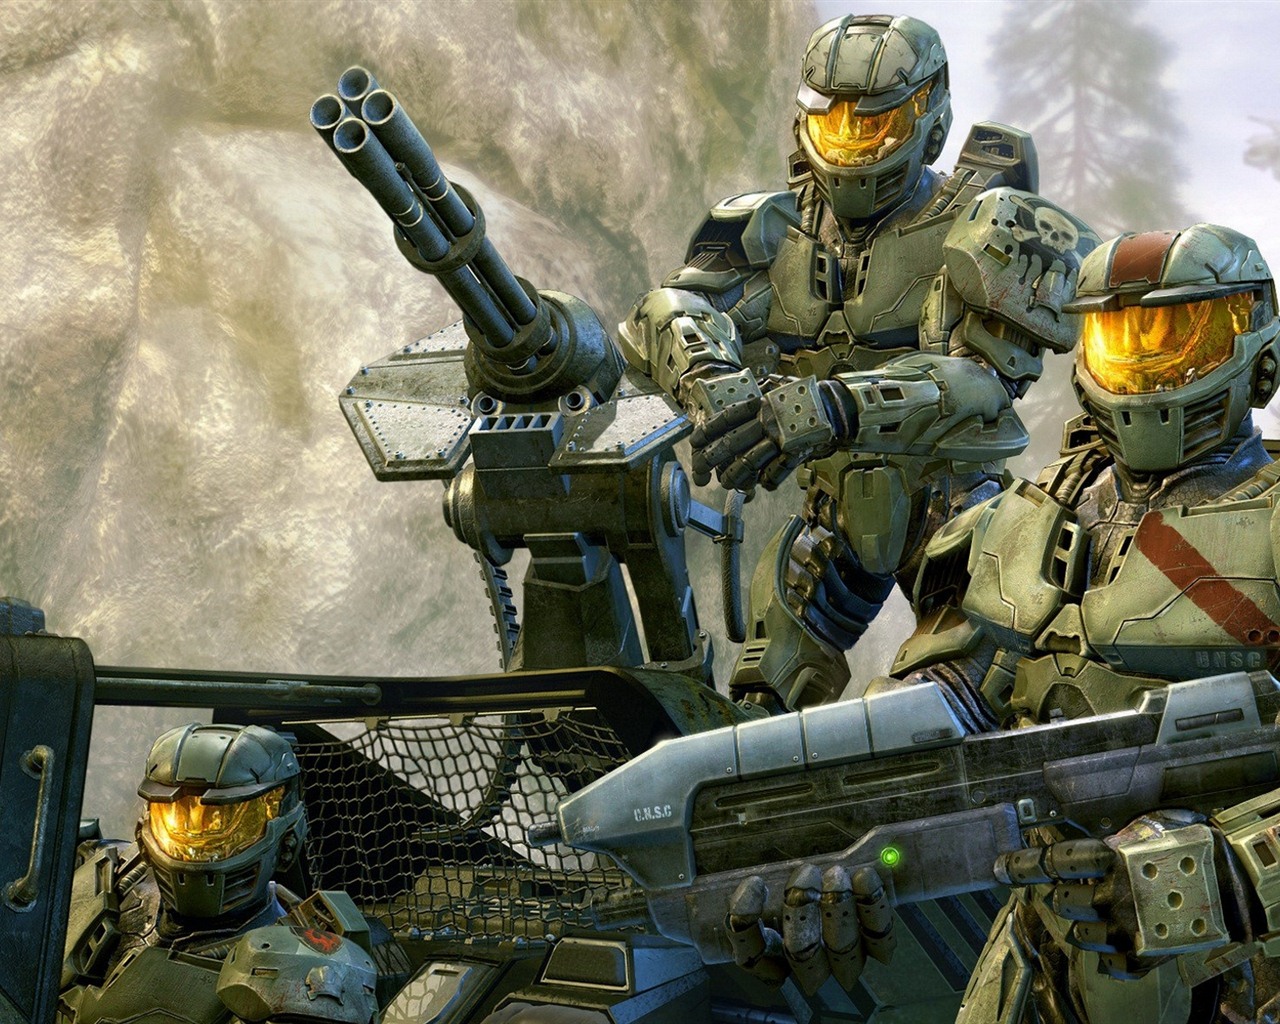 Halo Game HD Wallpapers #7 - 1280x1024